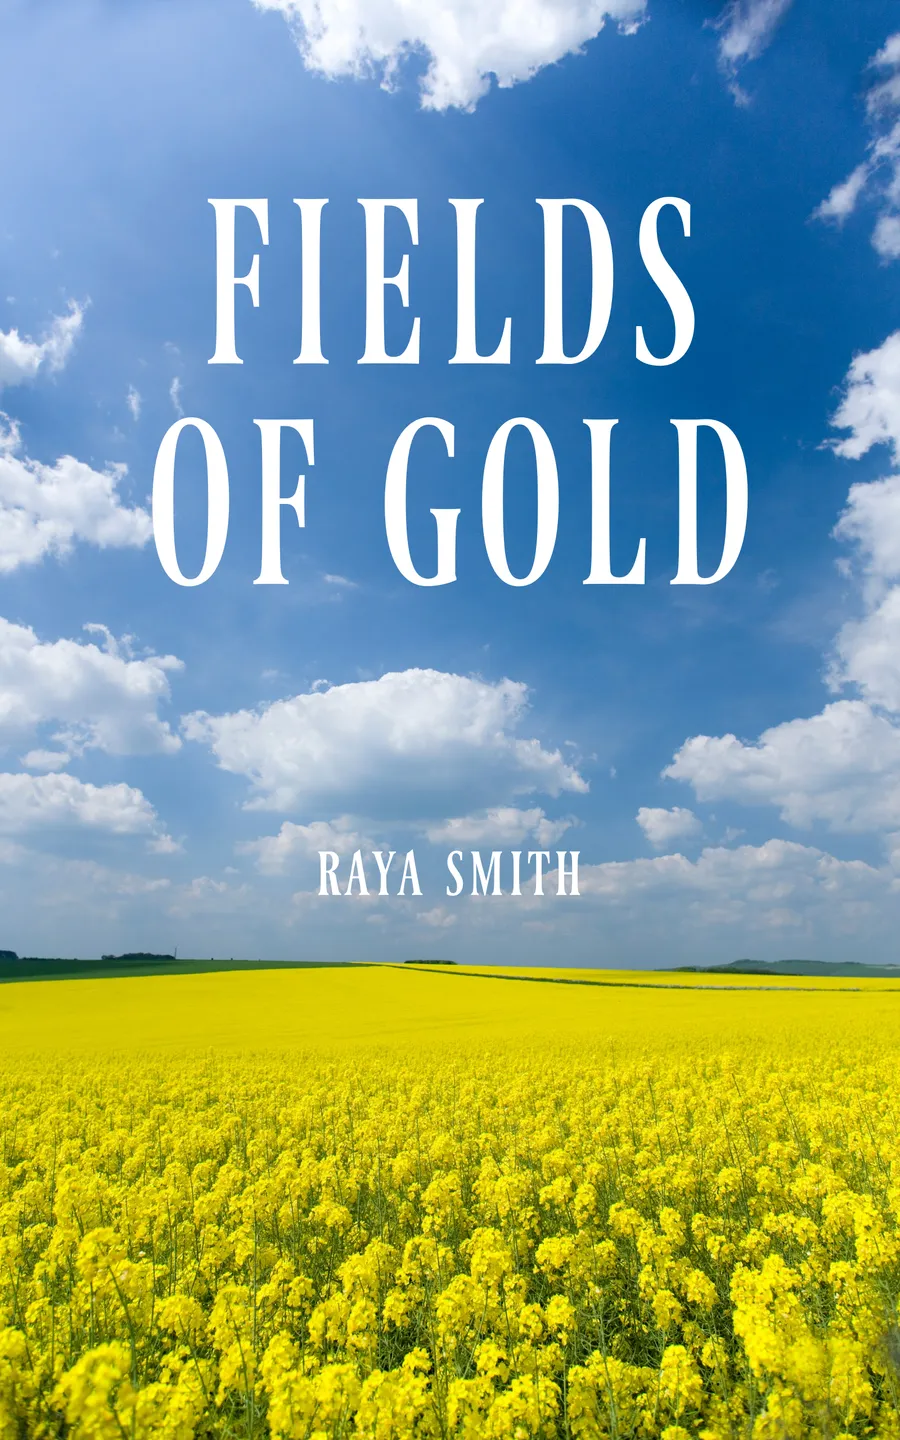 Fields of Gold book-covers template